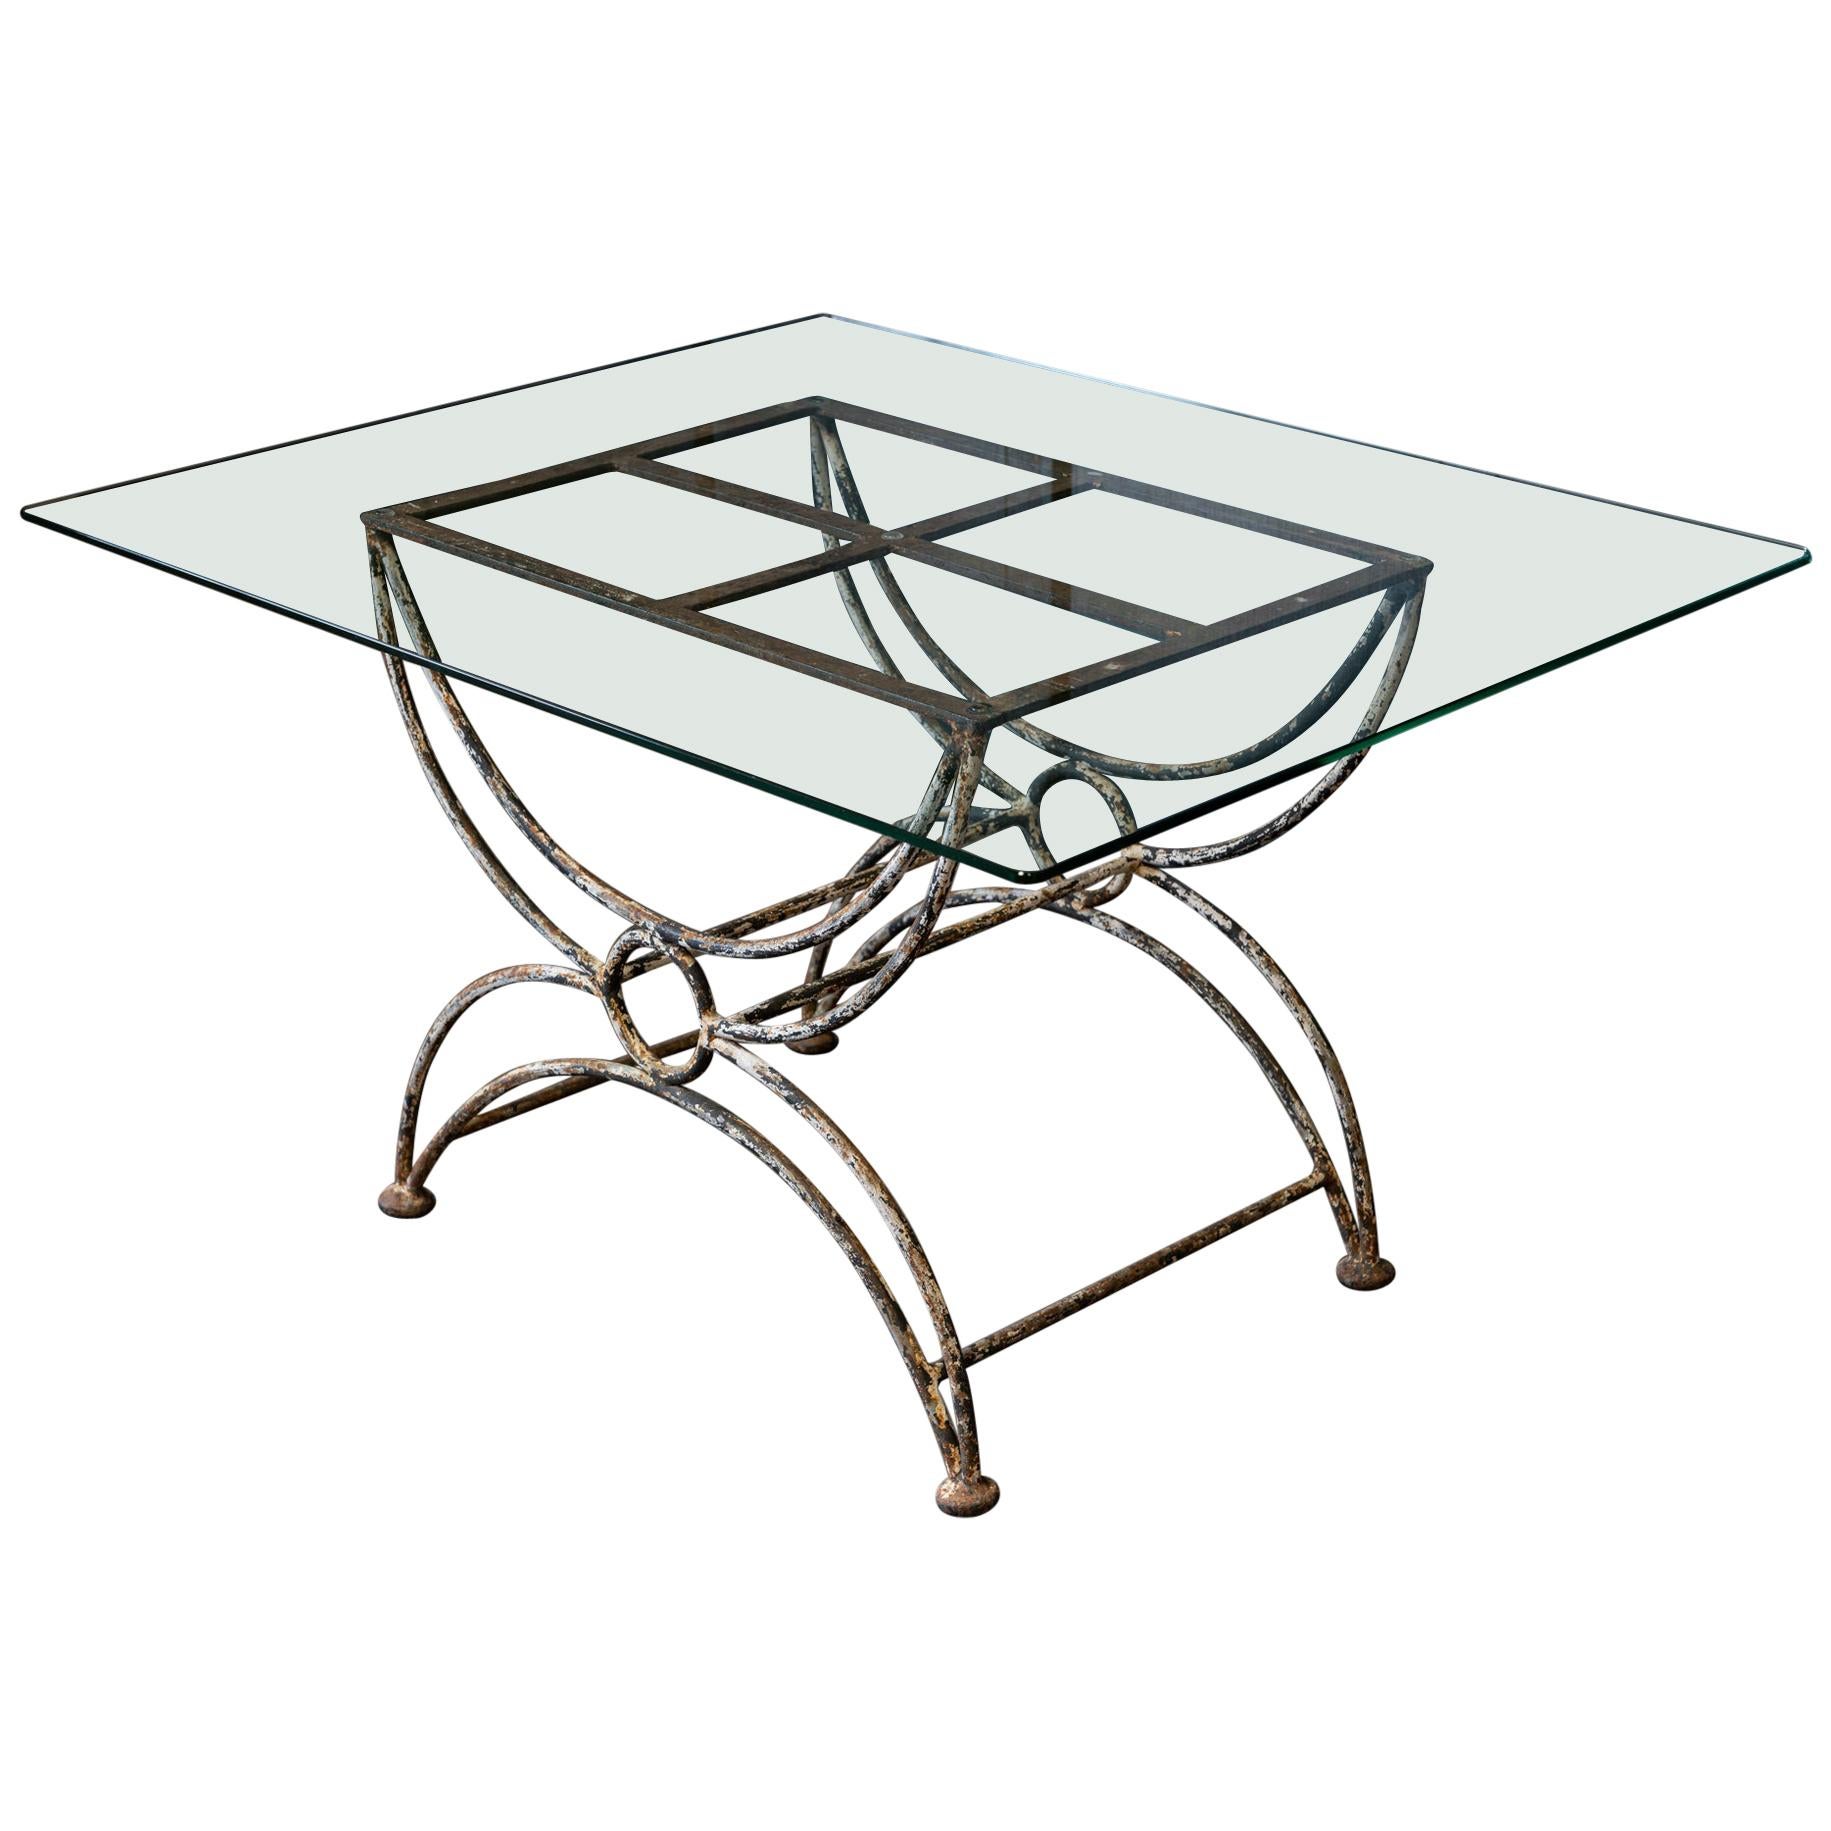 English Painted Wrought Iron and Glass Coffee, Side Table